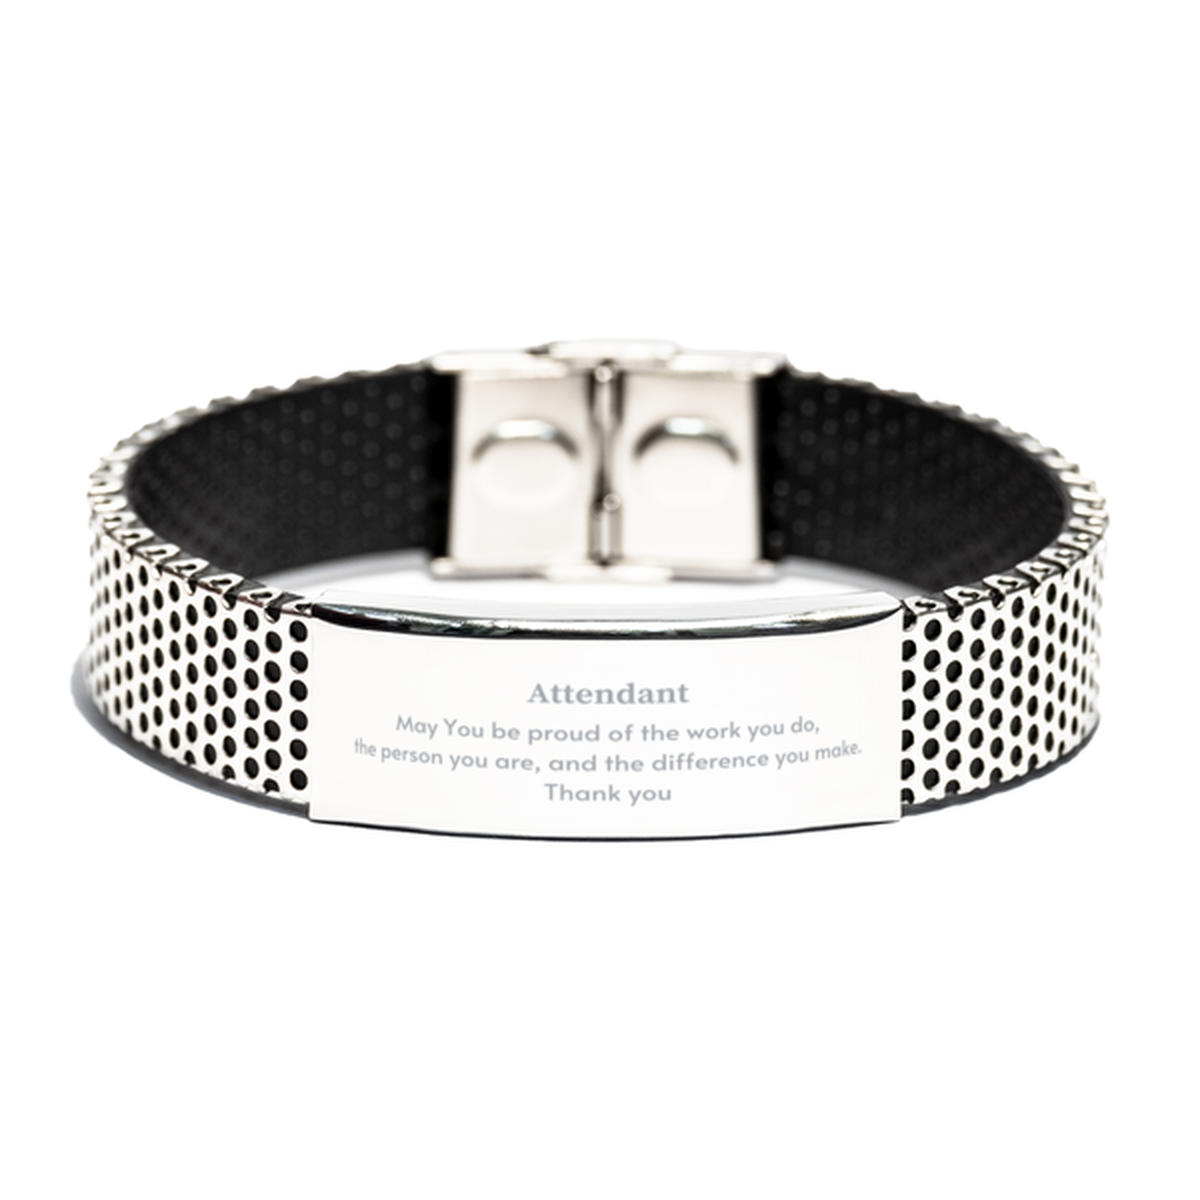 Heartwarming Stainless Steel Bracelet Retirement Coworkers Gifts for Attendant, Attendant May You be proud of the work you do, the person you are Gifts for Boss Men Women Friends